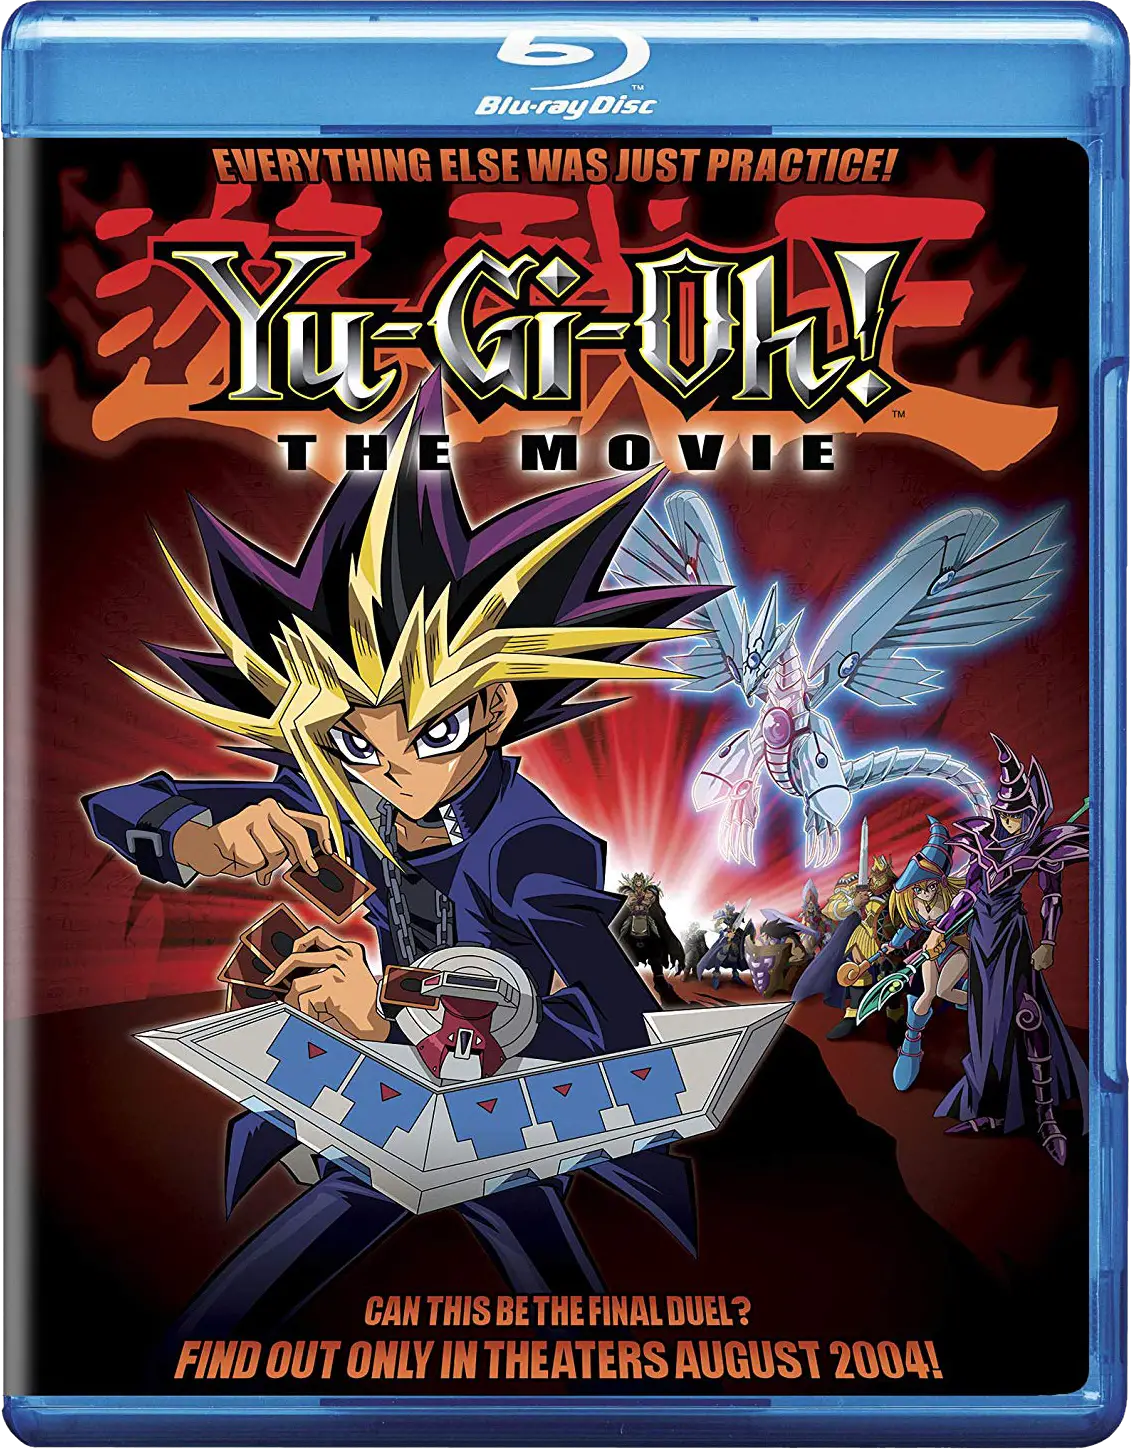 Primary MenuOriginal Yu-Gi-Oh The Movie Getting Blu-ray Re-releasePost navigationRecent NewsRecent CommentsUpcoming EventsNews CategoriesYuGiOh! Amime SeriesThe Video GamesTrading Card GameRegister / Login / RSSArchivesSupport UsYuGiOh! WorldRecommended SitesRecent CommentsSocial Media